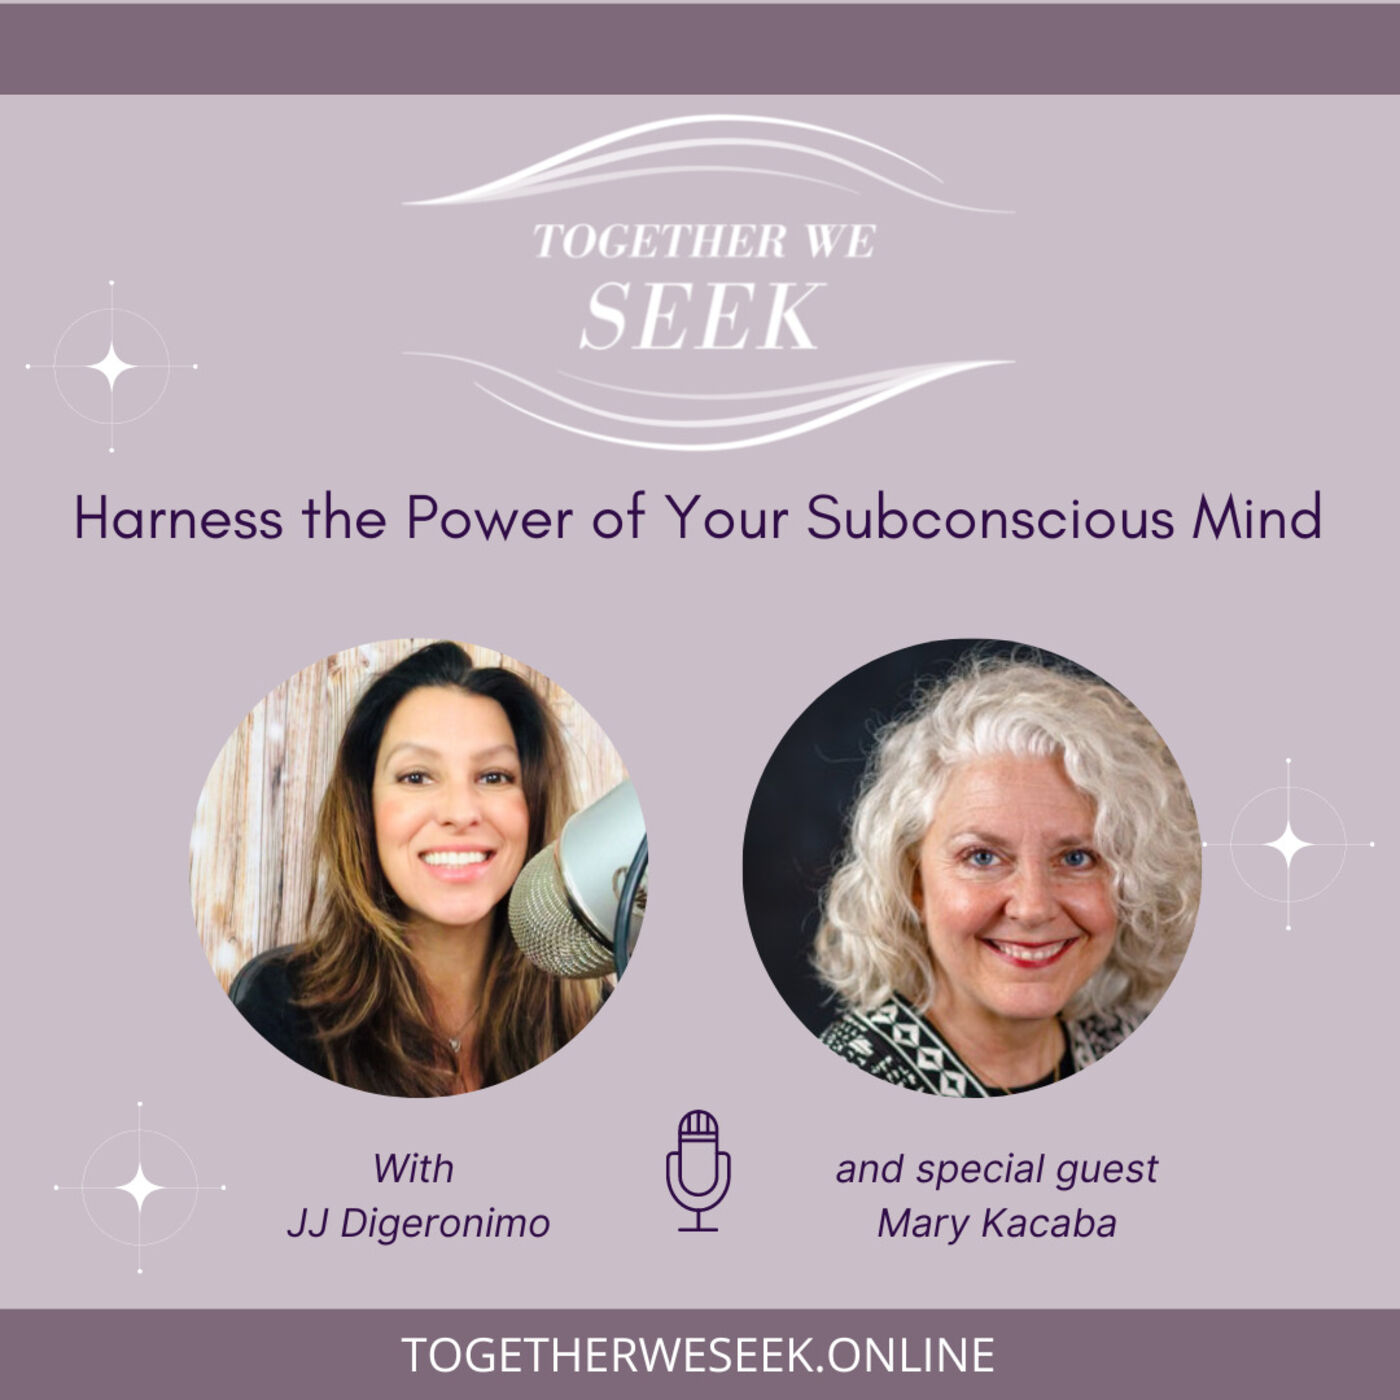 Harness the Power of Your Subconscious Mind with Mary Kacaba